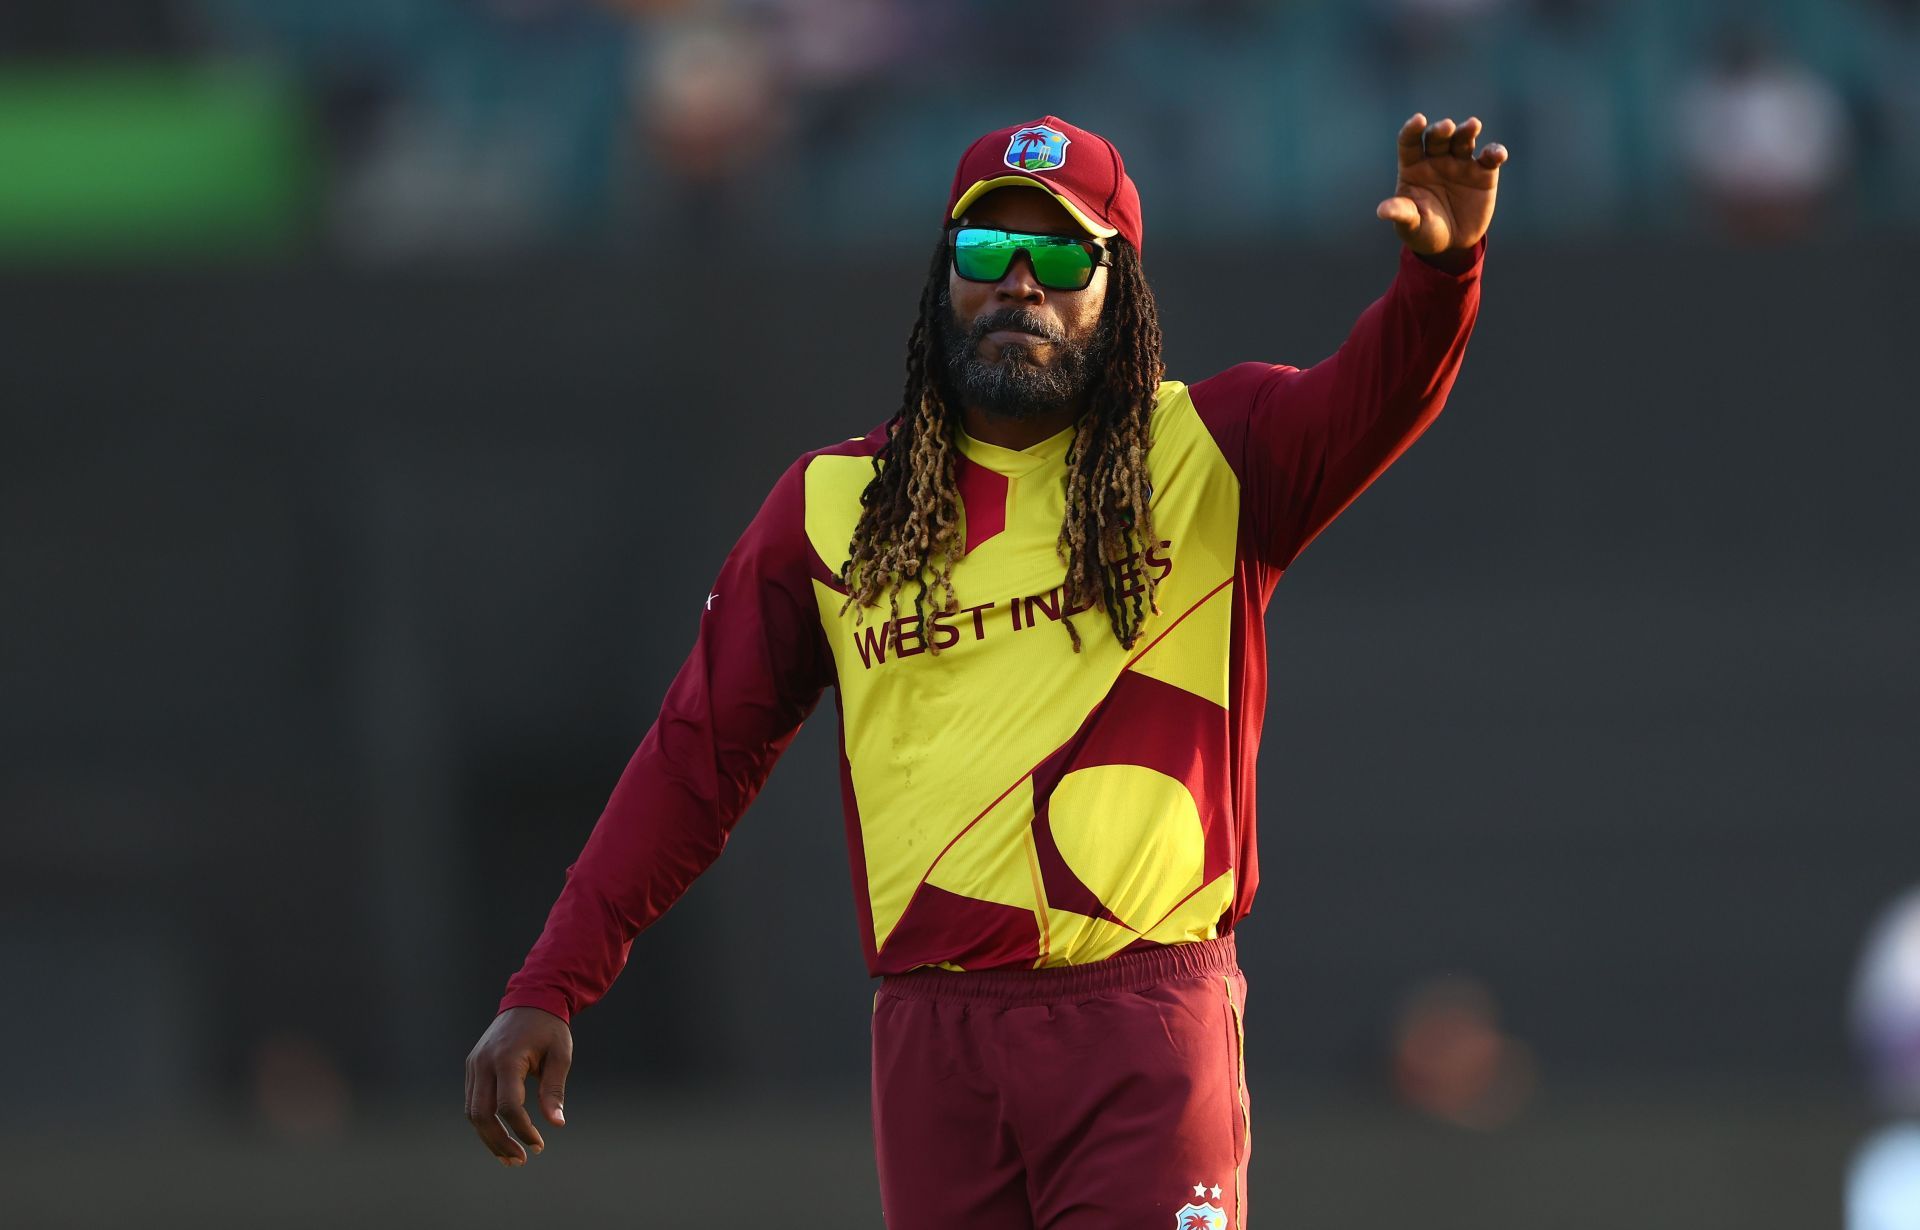 Chris Gayle was the top T20 run-getter in 2015 with 1665 runs in 36 innings.